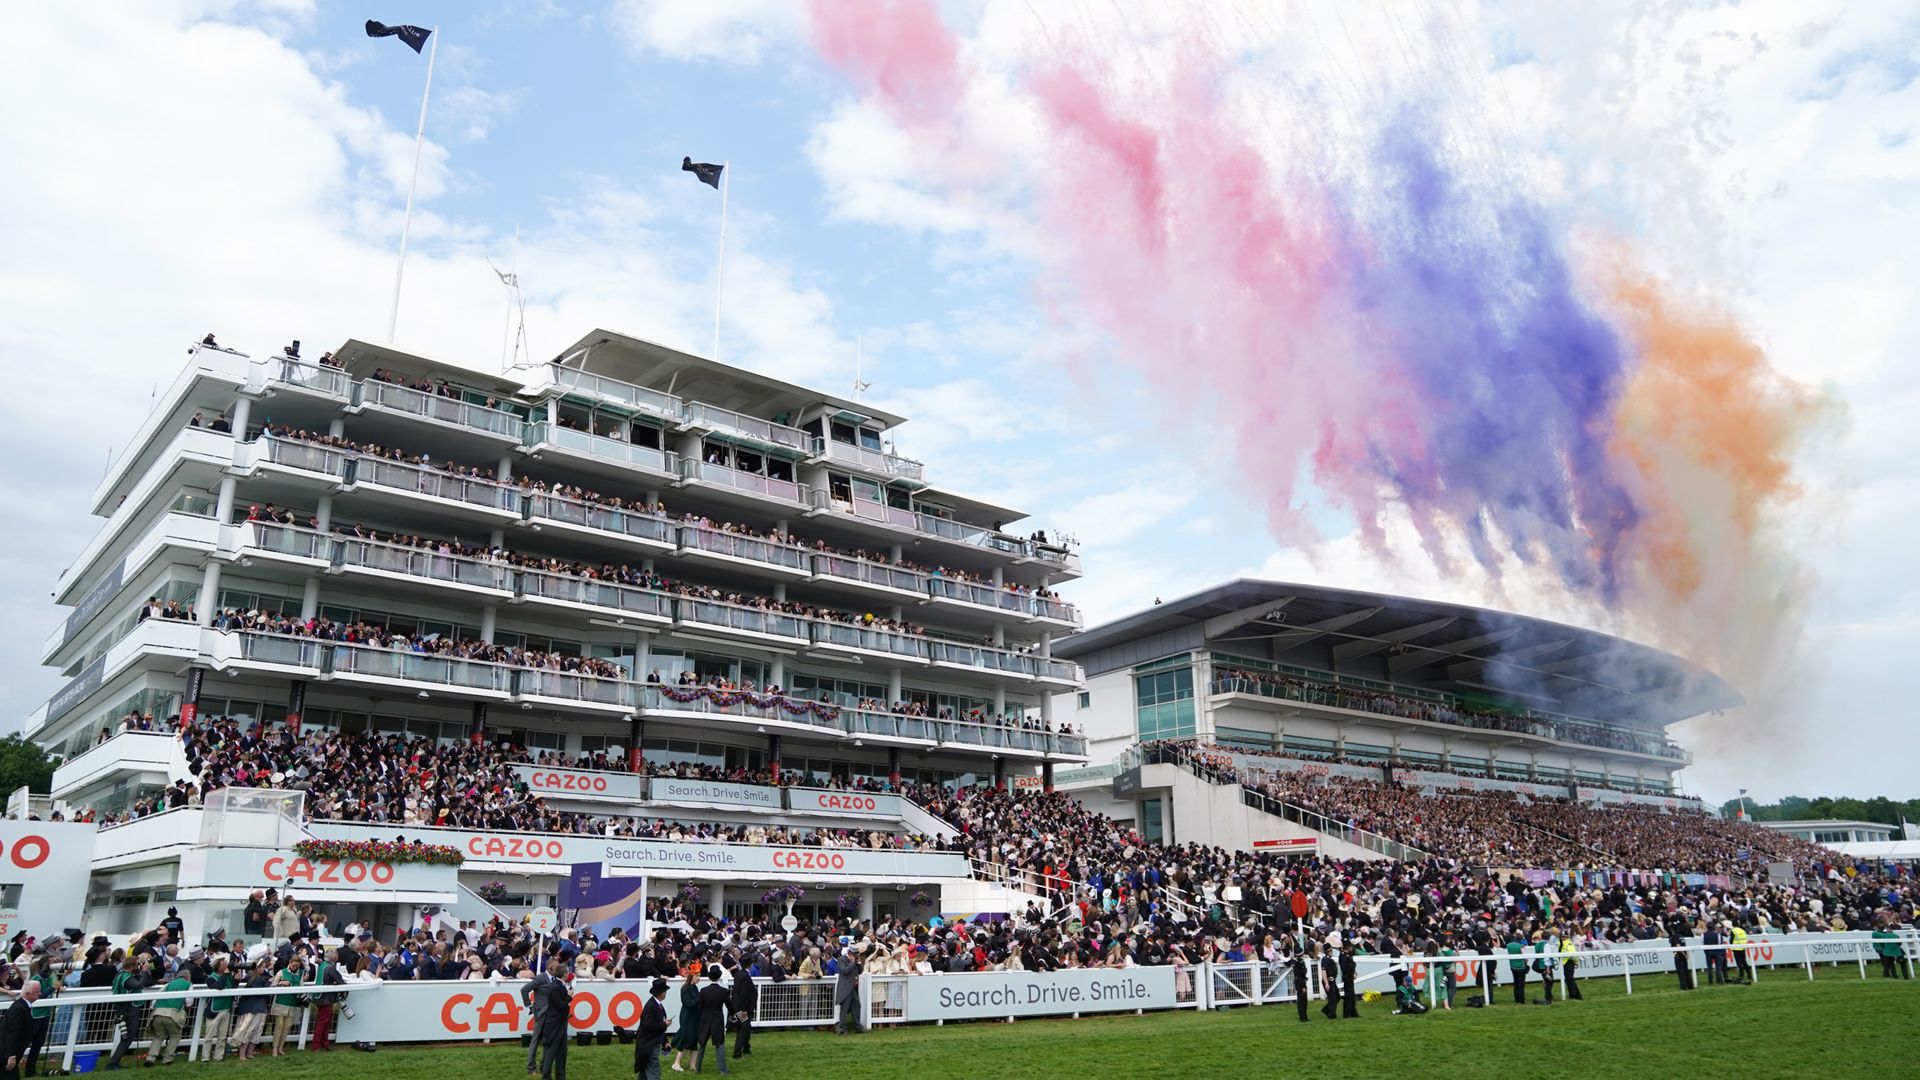 Epsom Derby brought forward to avoid FA Cup final clash